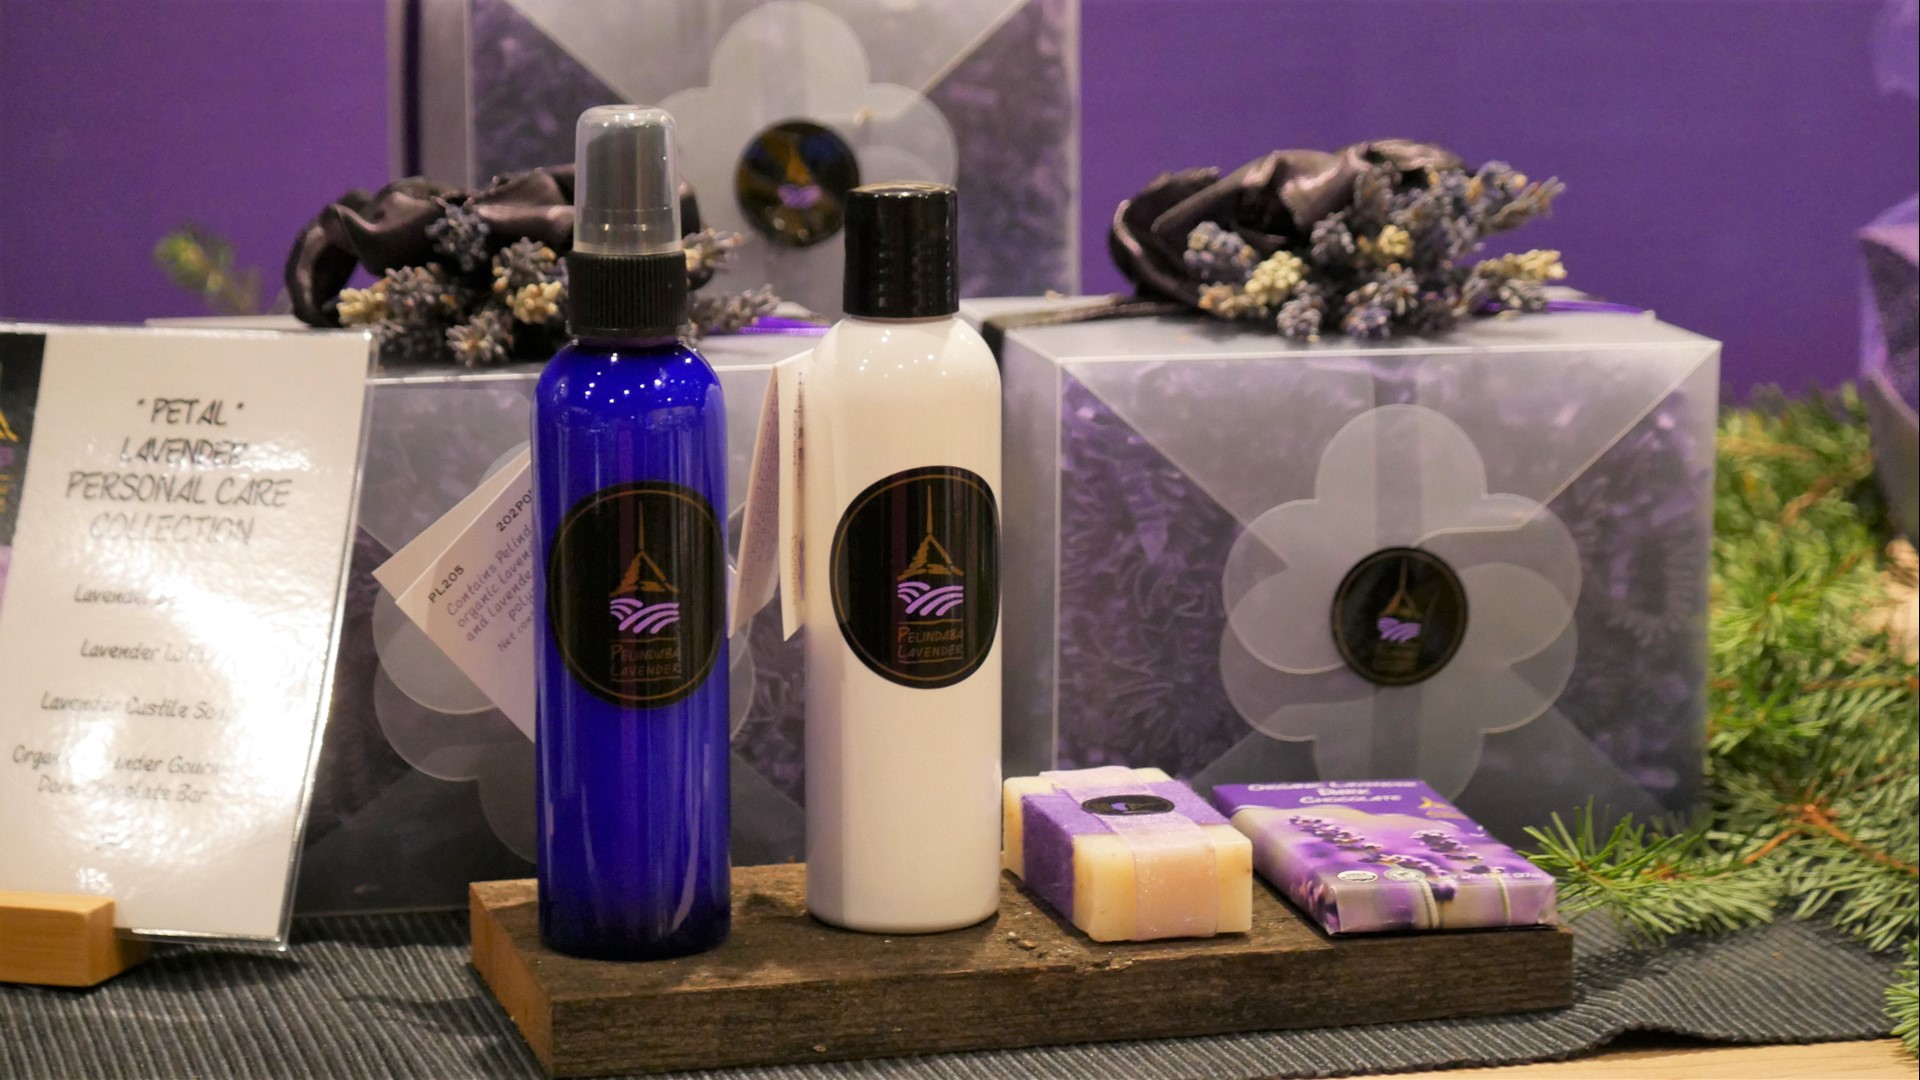 Pelindaba Lavender in Edmonds is a lavender lover's wonderland - from lip balm to hot chocolate, there's something for everyone! Sponsored by Pelindaba Lavender